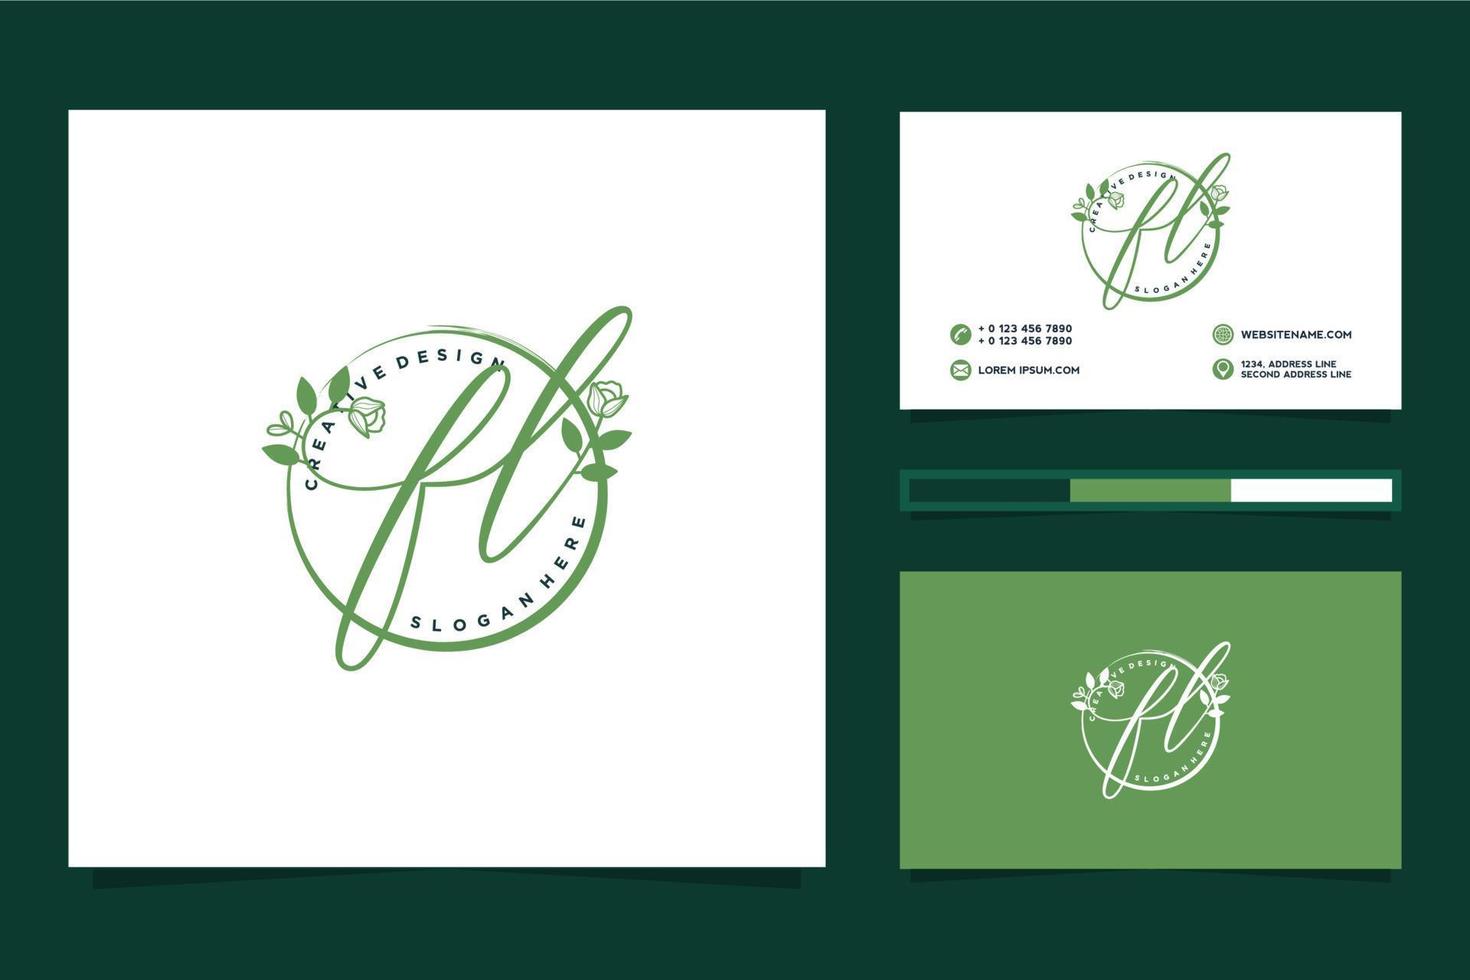 Initial FL Feminine logo collections and business card templat Premium Vector